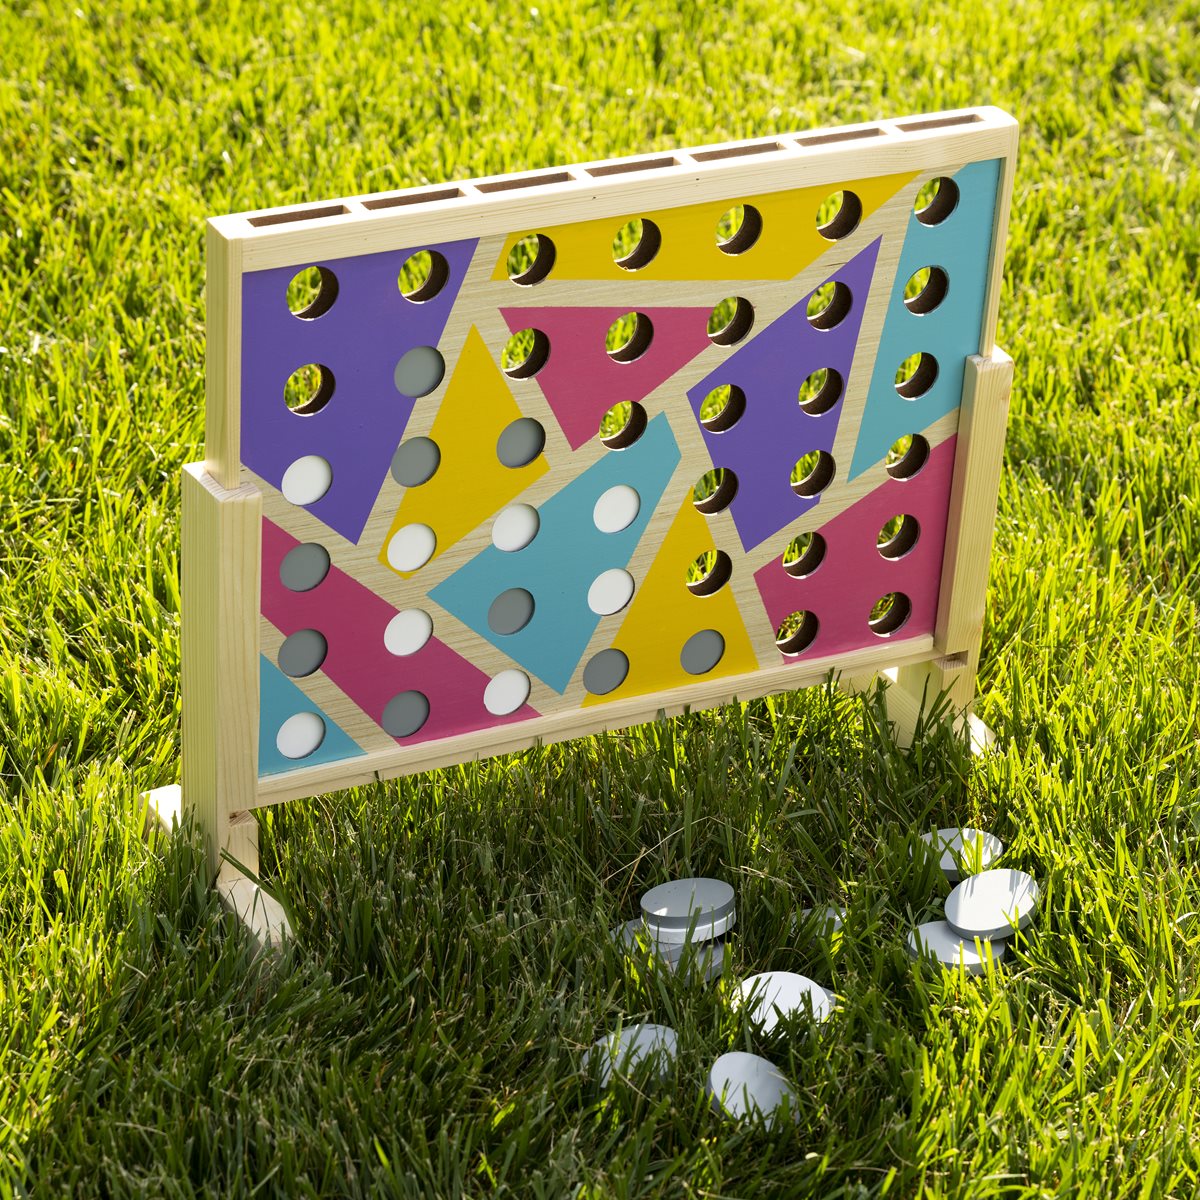 Giant Vertical Lawn Checkers